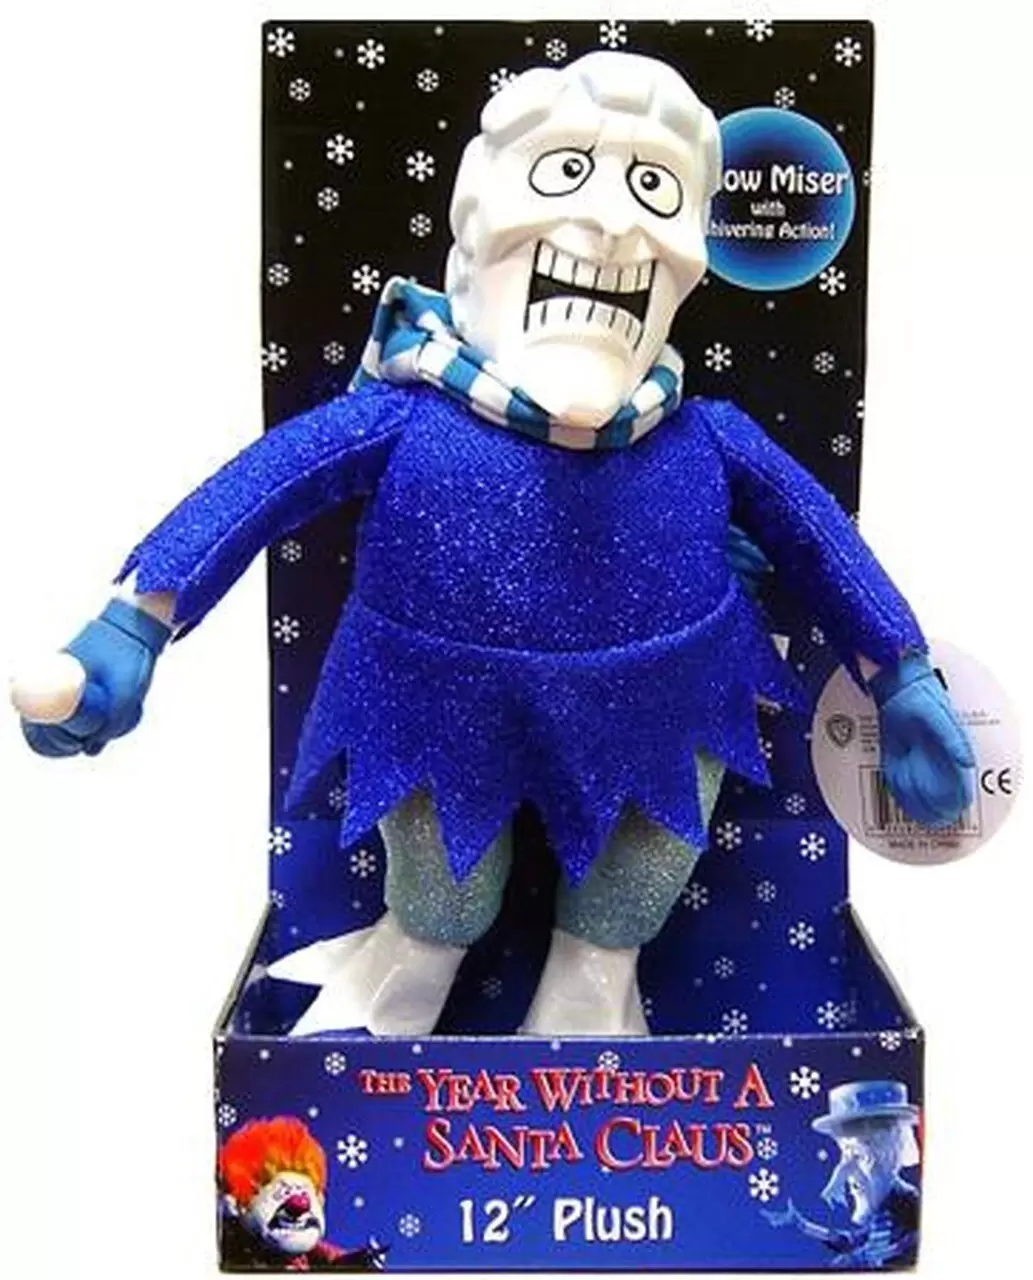 NECA - The Year without a Santa Claus - Snow Miser